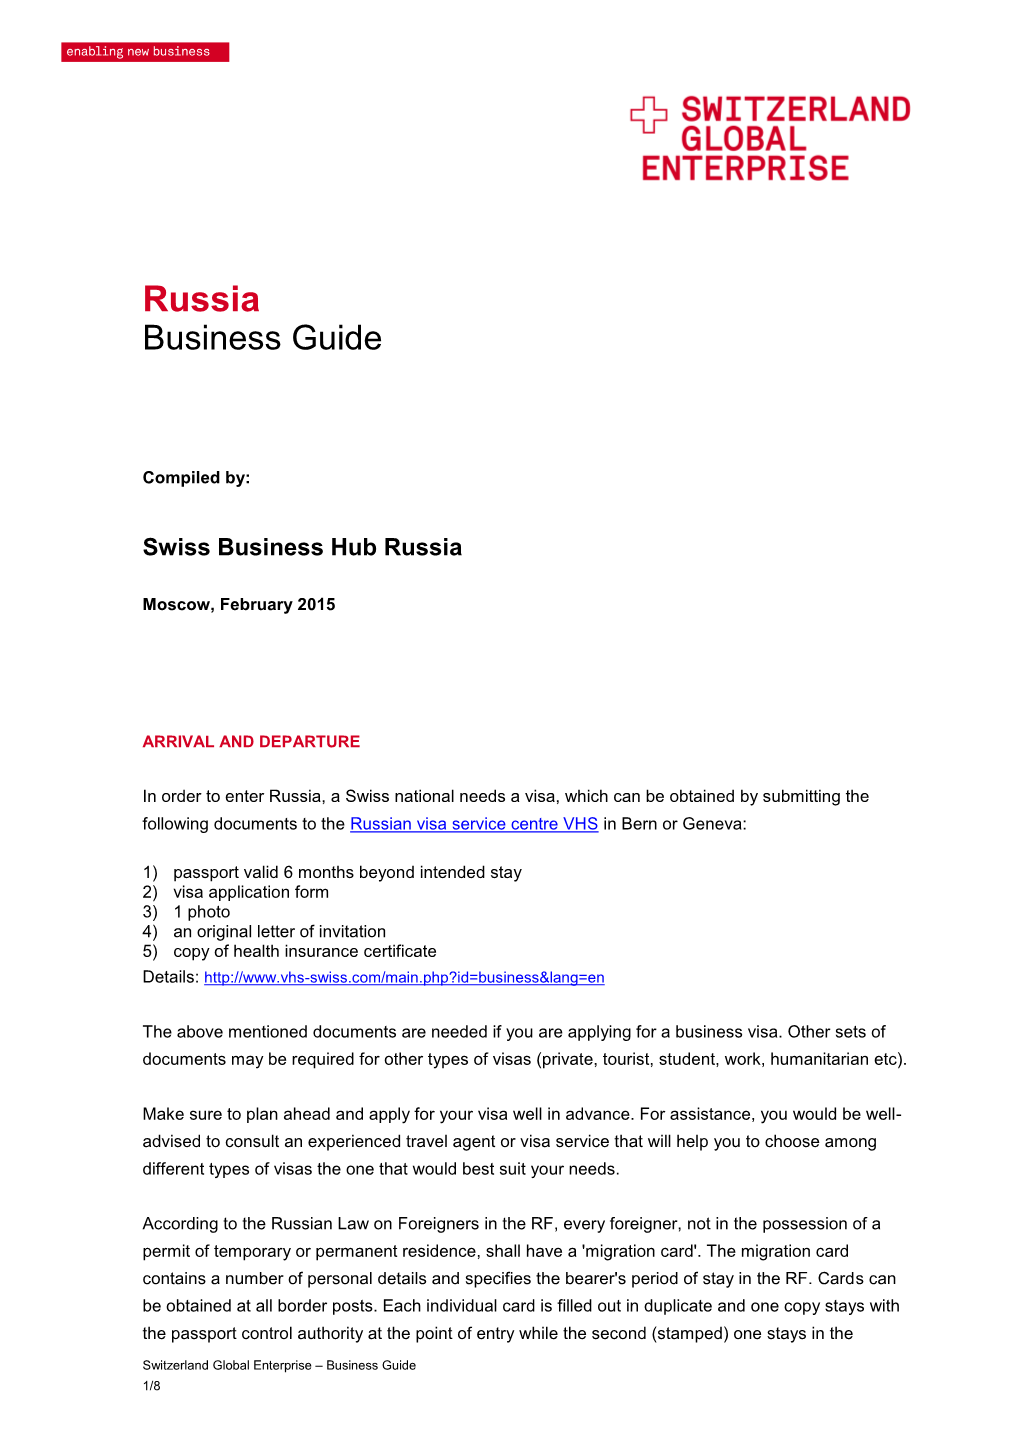 Russia Business Guide